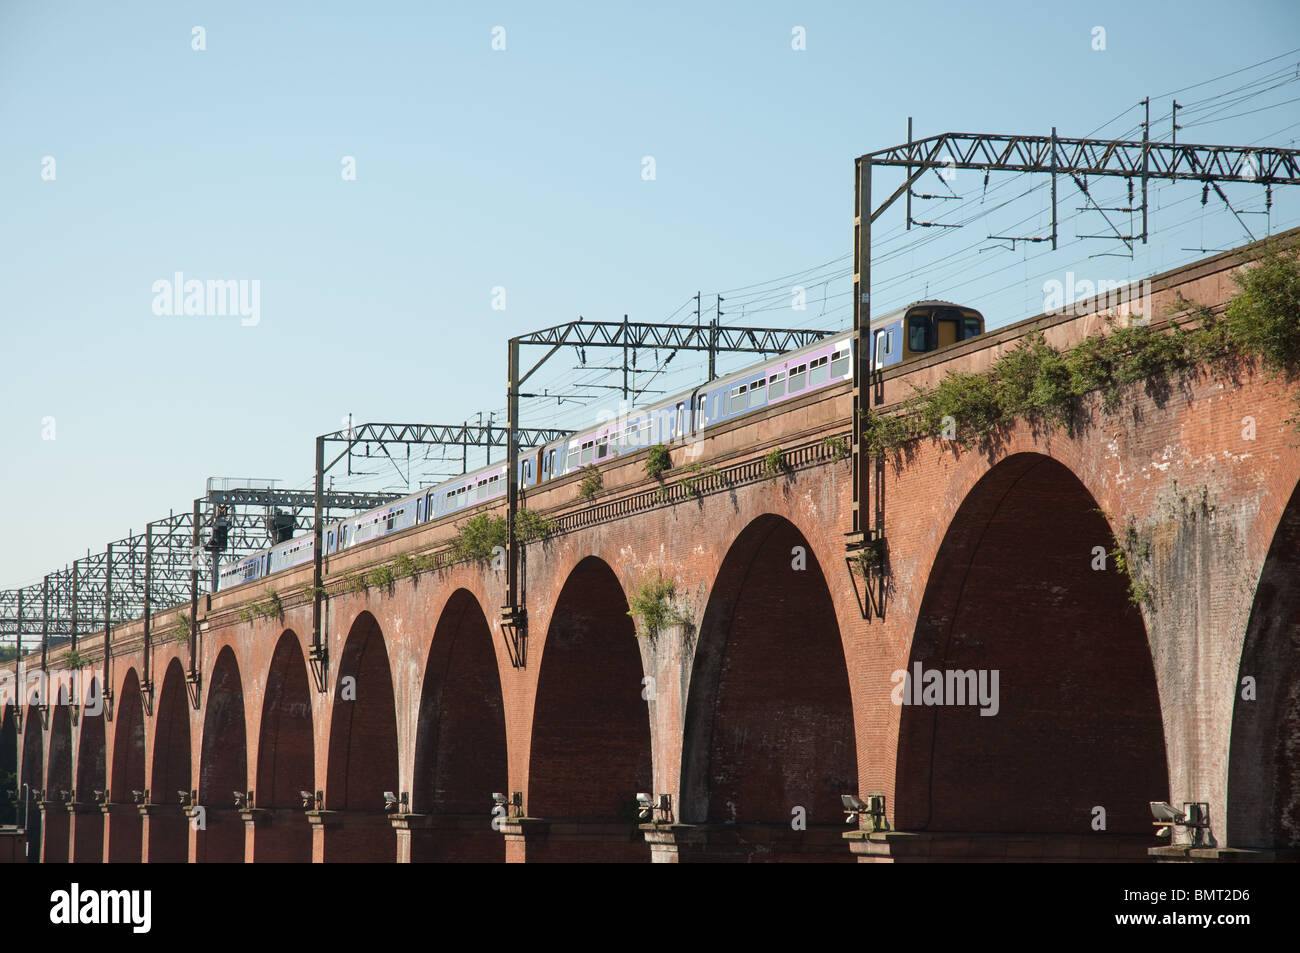 Train traveling across Stockport viaduct, opened in 1840 the structure,built with 11 million bricks,was the largest in the world Stock Photo